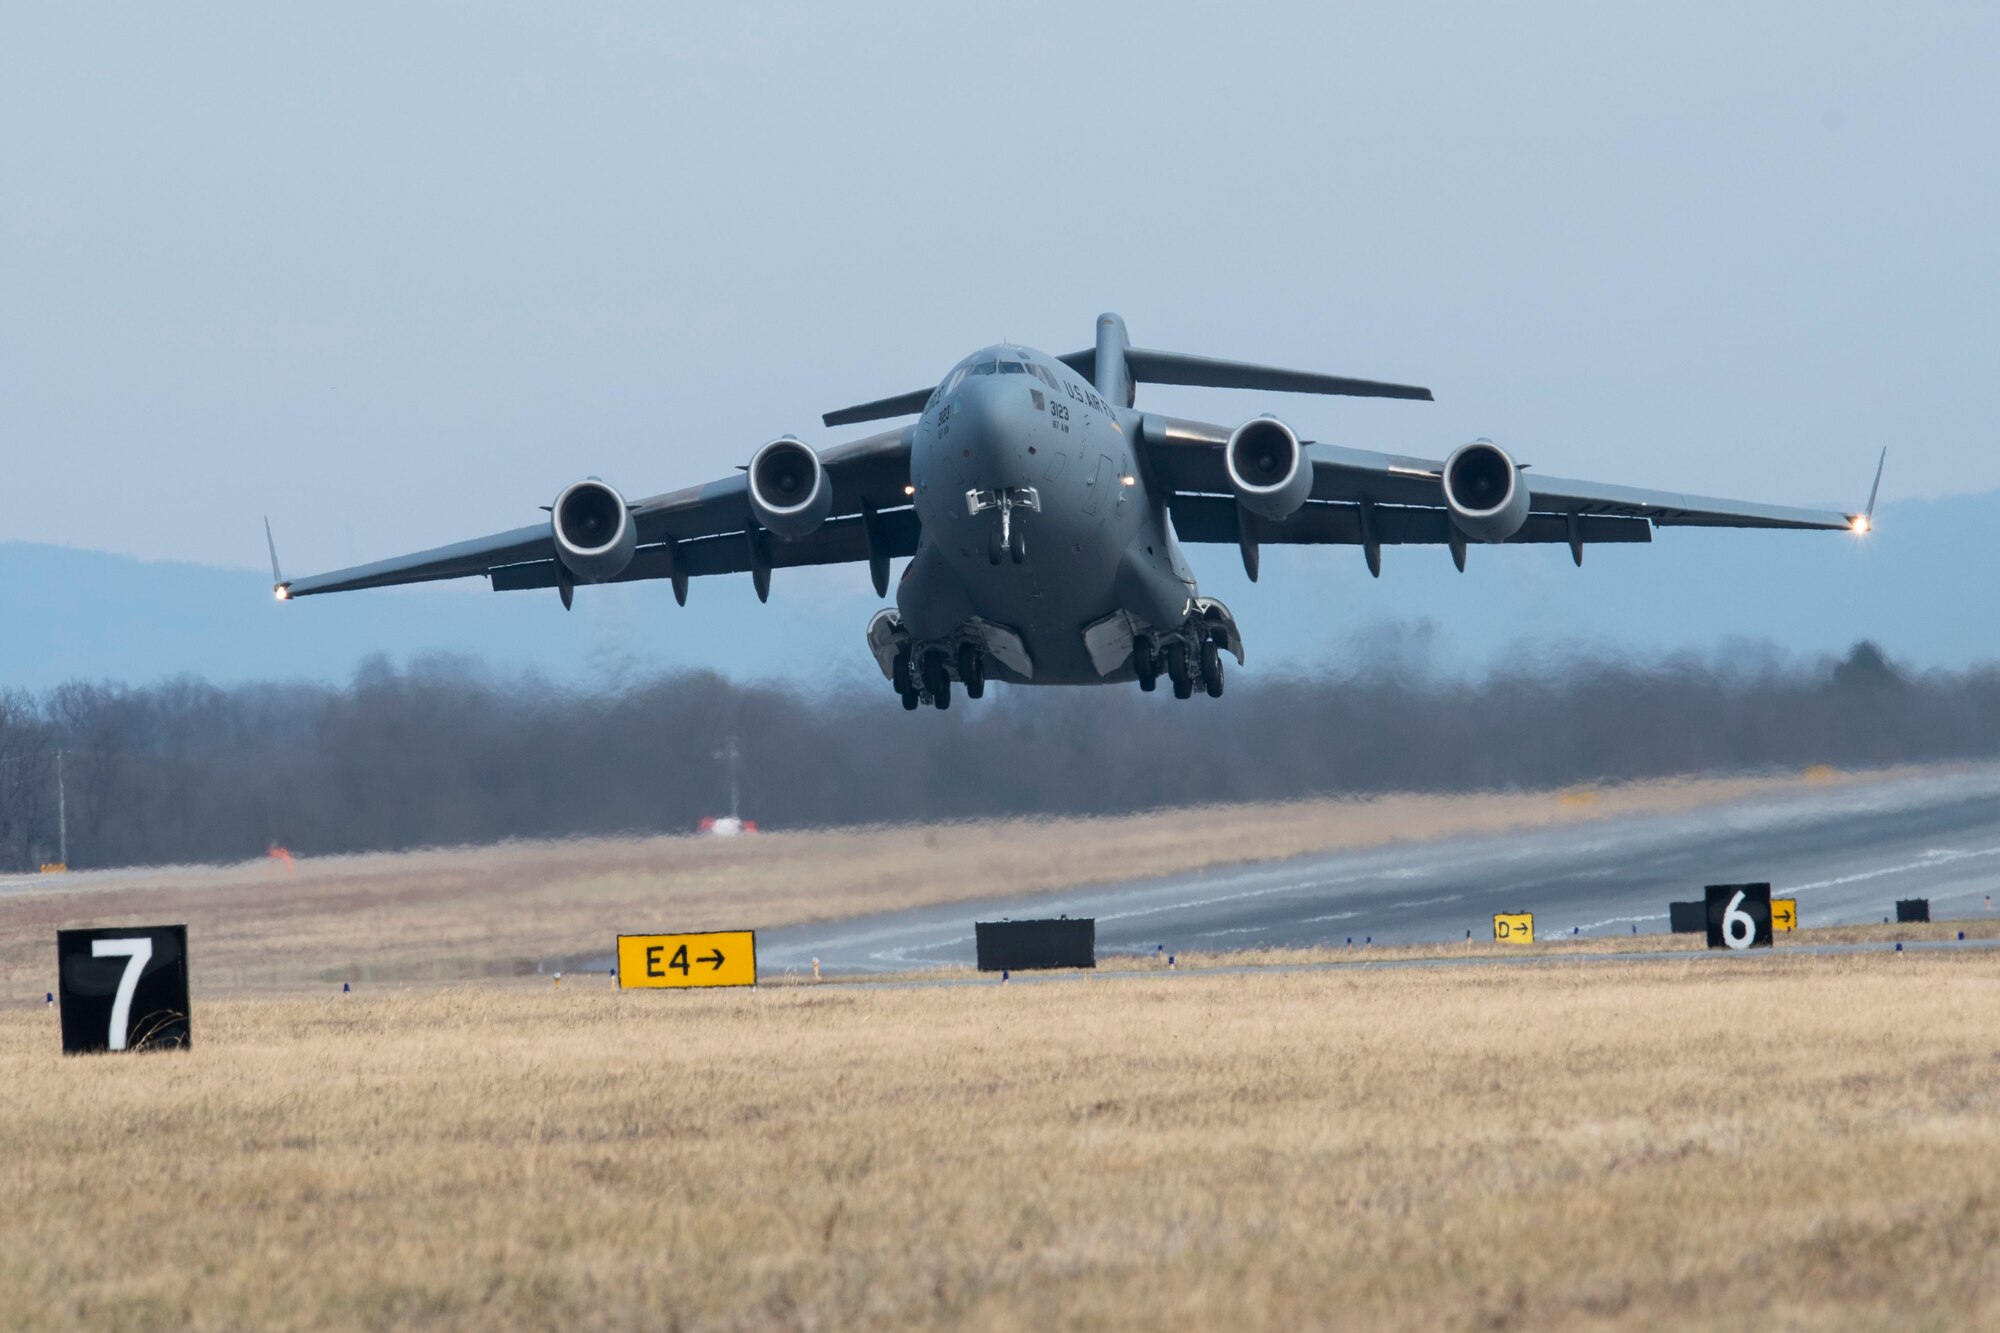 A C-17 Globemaster III aircraft takes off for a training flight from Shepherd Field, Martinsburg, W.Va., Dec 20. Aircrews fly routine training missions in addition to numerous Guard and Tanker Airlift Control Center missions each month. (U.S. Air National Guard photo by Senior Master Sgt. Emily Beightol-Deyerle)